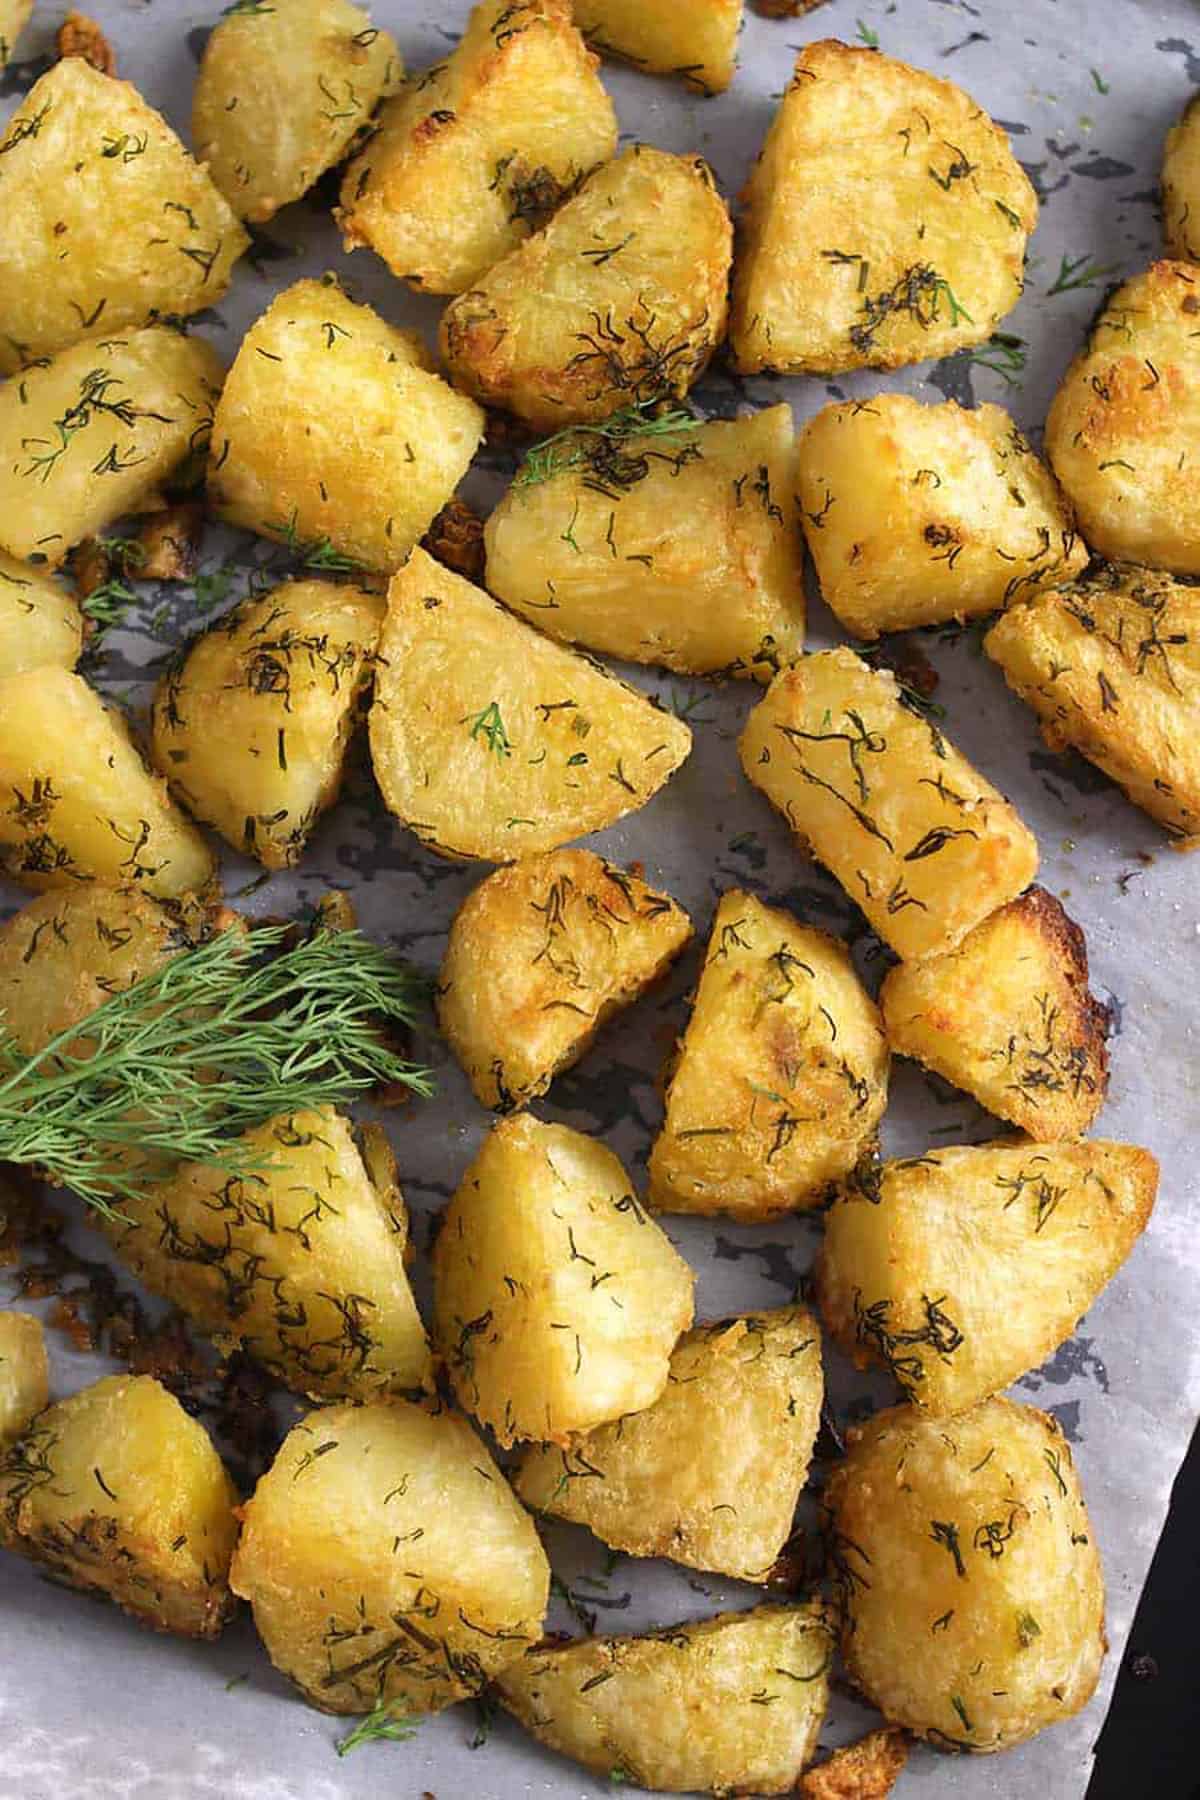 Top view of Roasted garlic-herb potatoes garnished with fresh dill leaves in a baking pan.